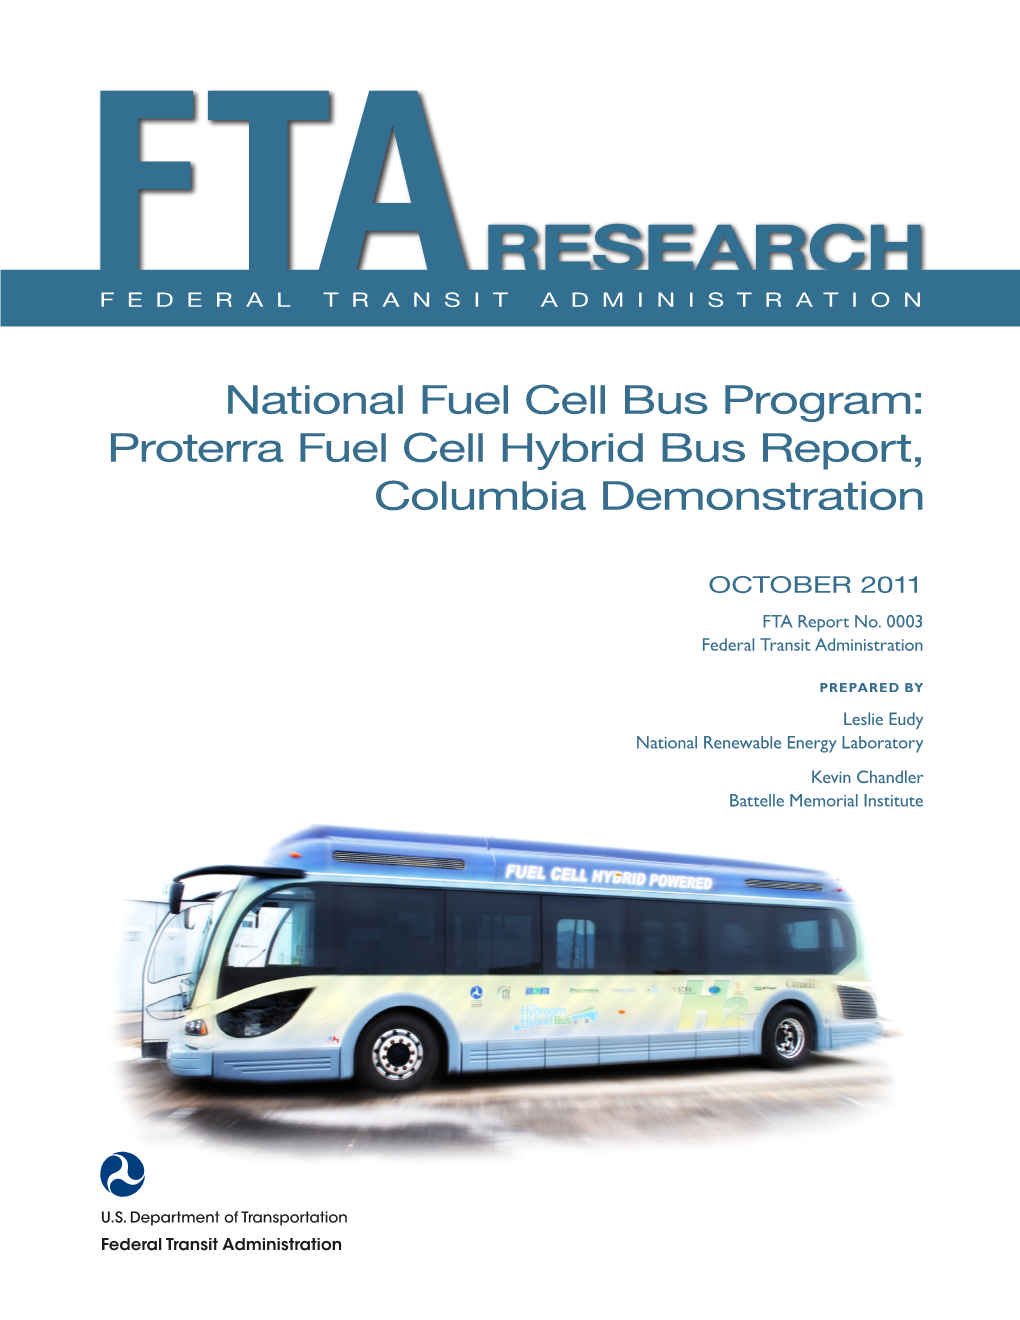 Proterra Fuel Cell Hybrid Bus Report, Columbia Demonstration